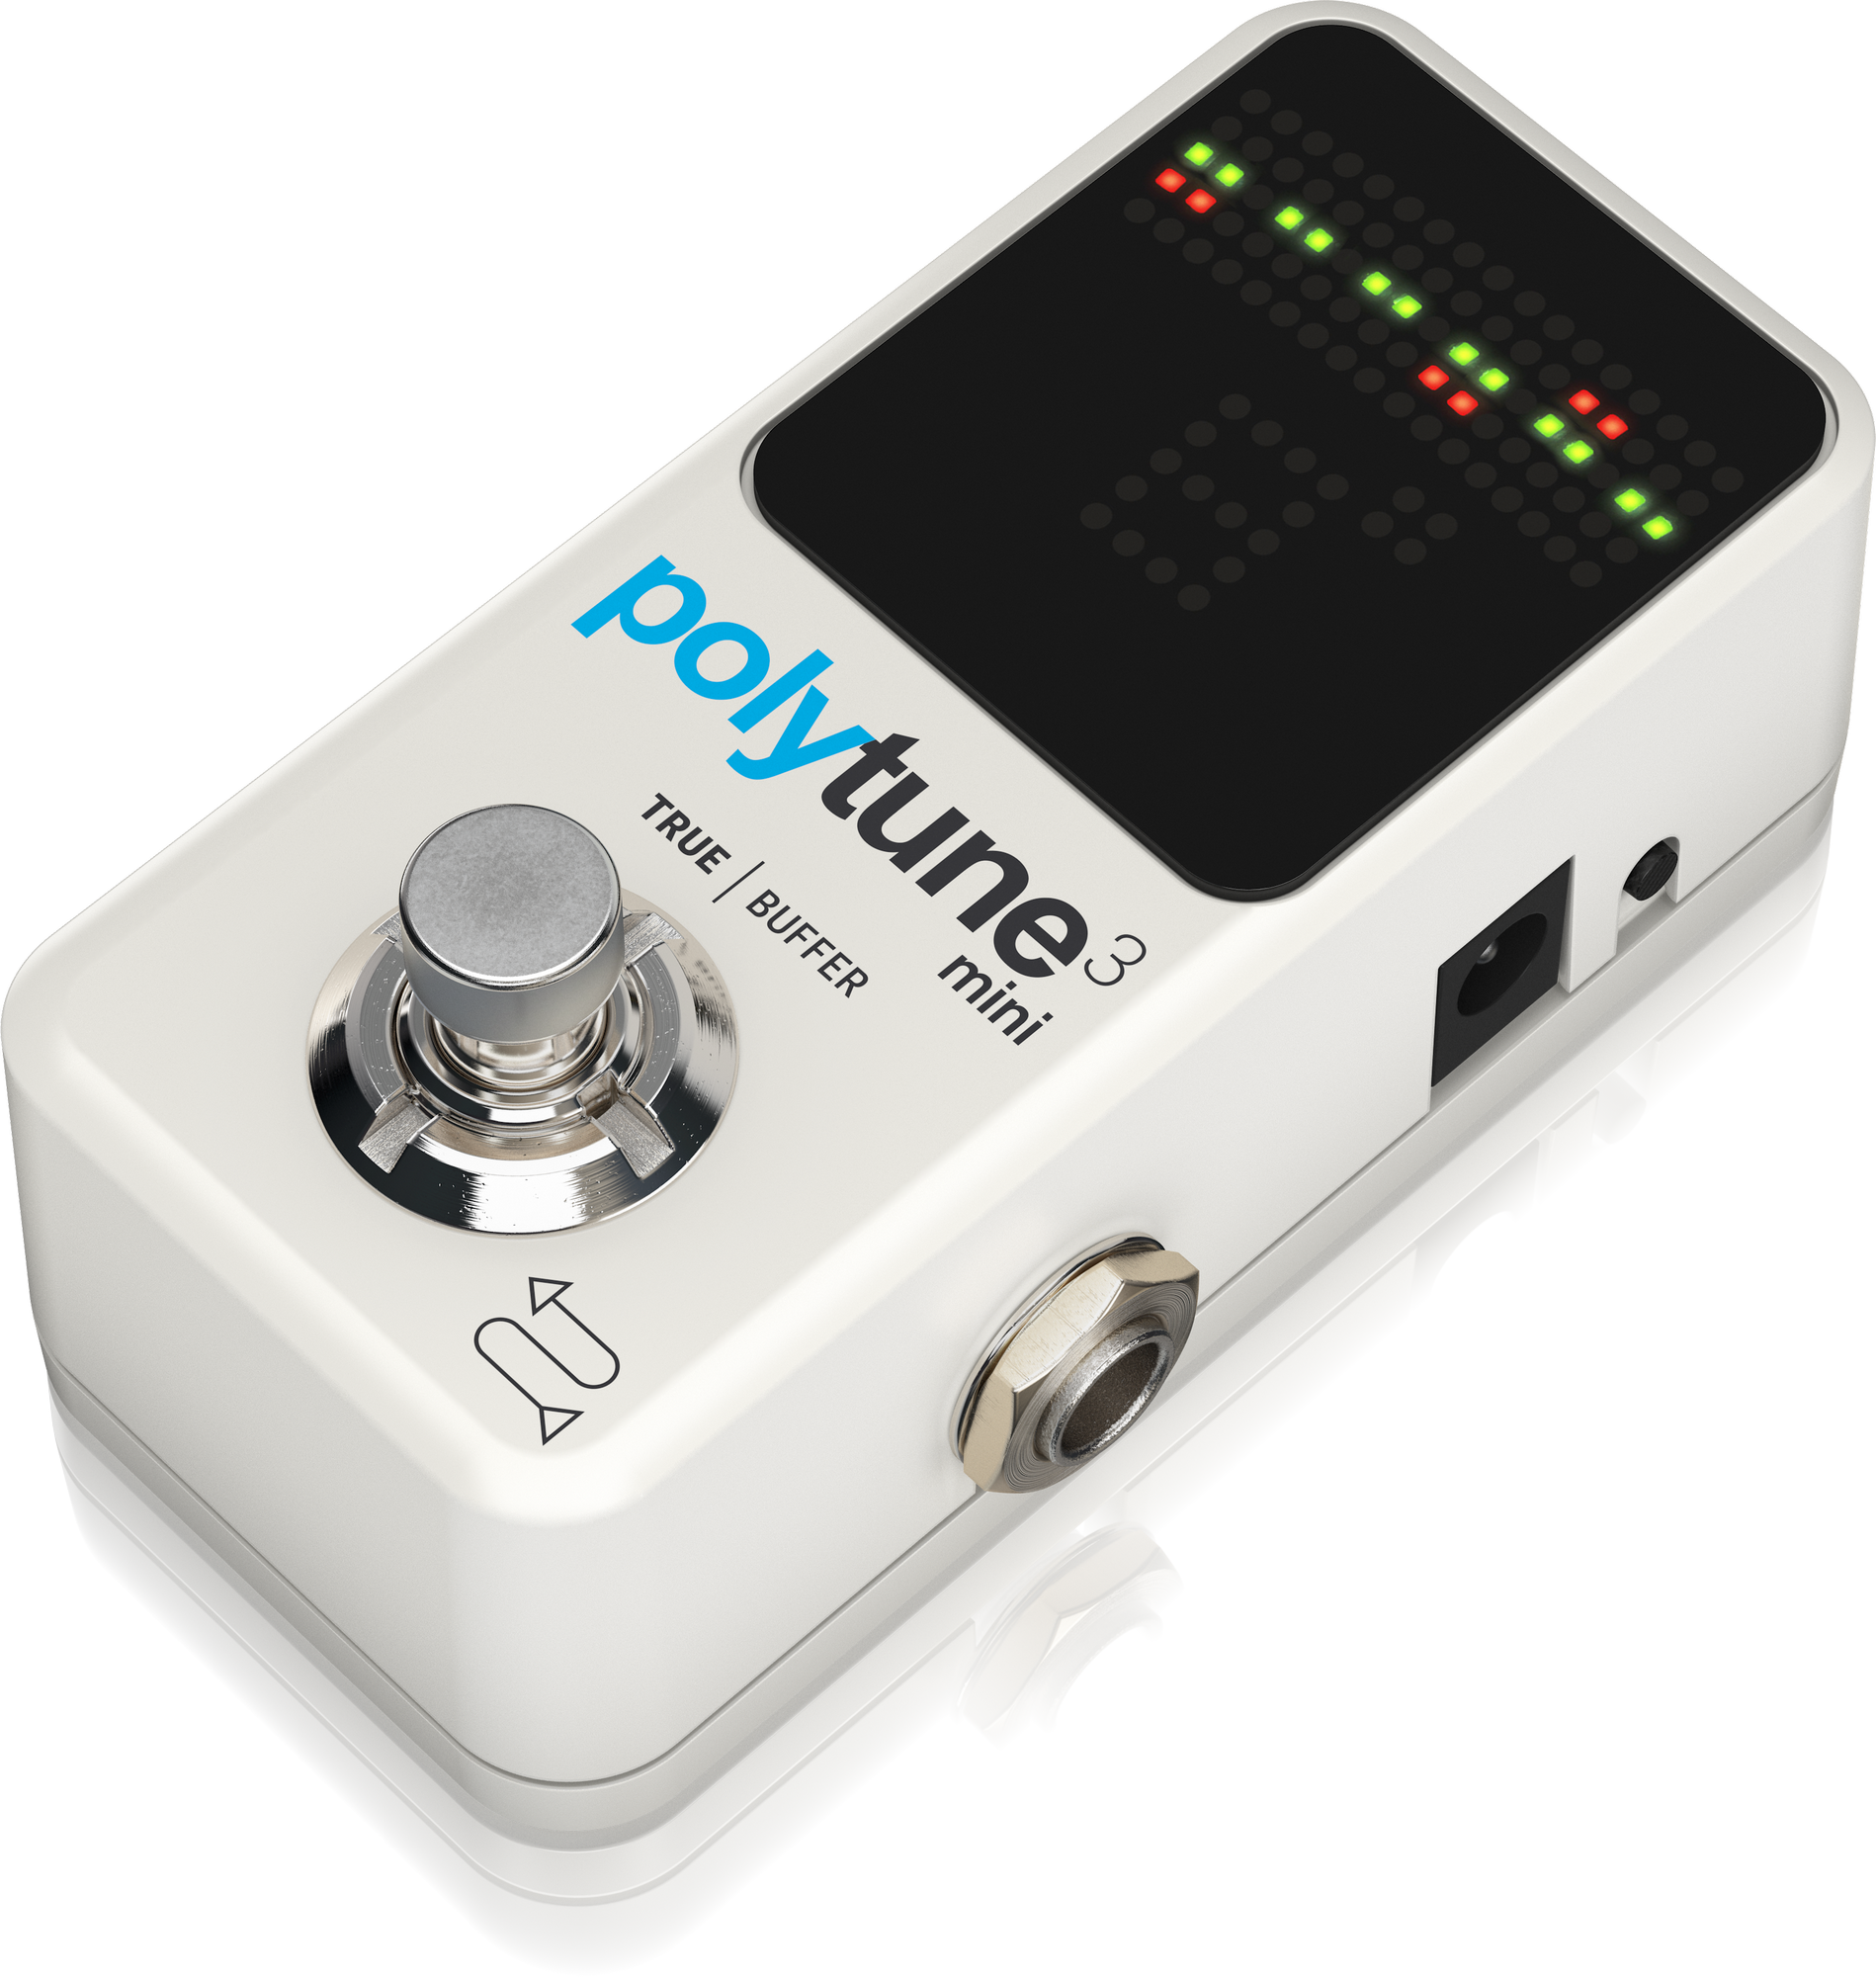 TC Electronic Polytune 3 Mini Tiny Polyphonic Tuner With Multiple Tuning Modes And Built-in Bonafide Buffer, TC ELECTRONIC, TUNER & METRONOME, tc-electronic-tuner-metronome-tc-polytune-3-mini, ZOSO MUSIC SDN BHD